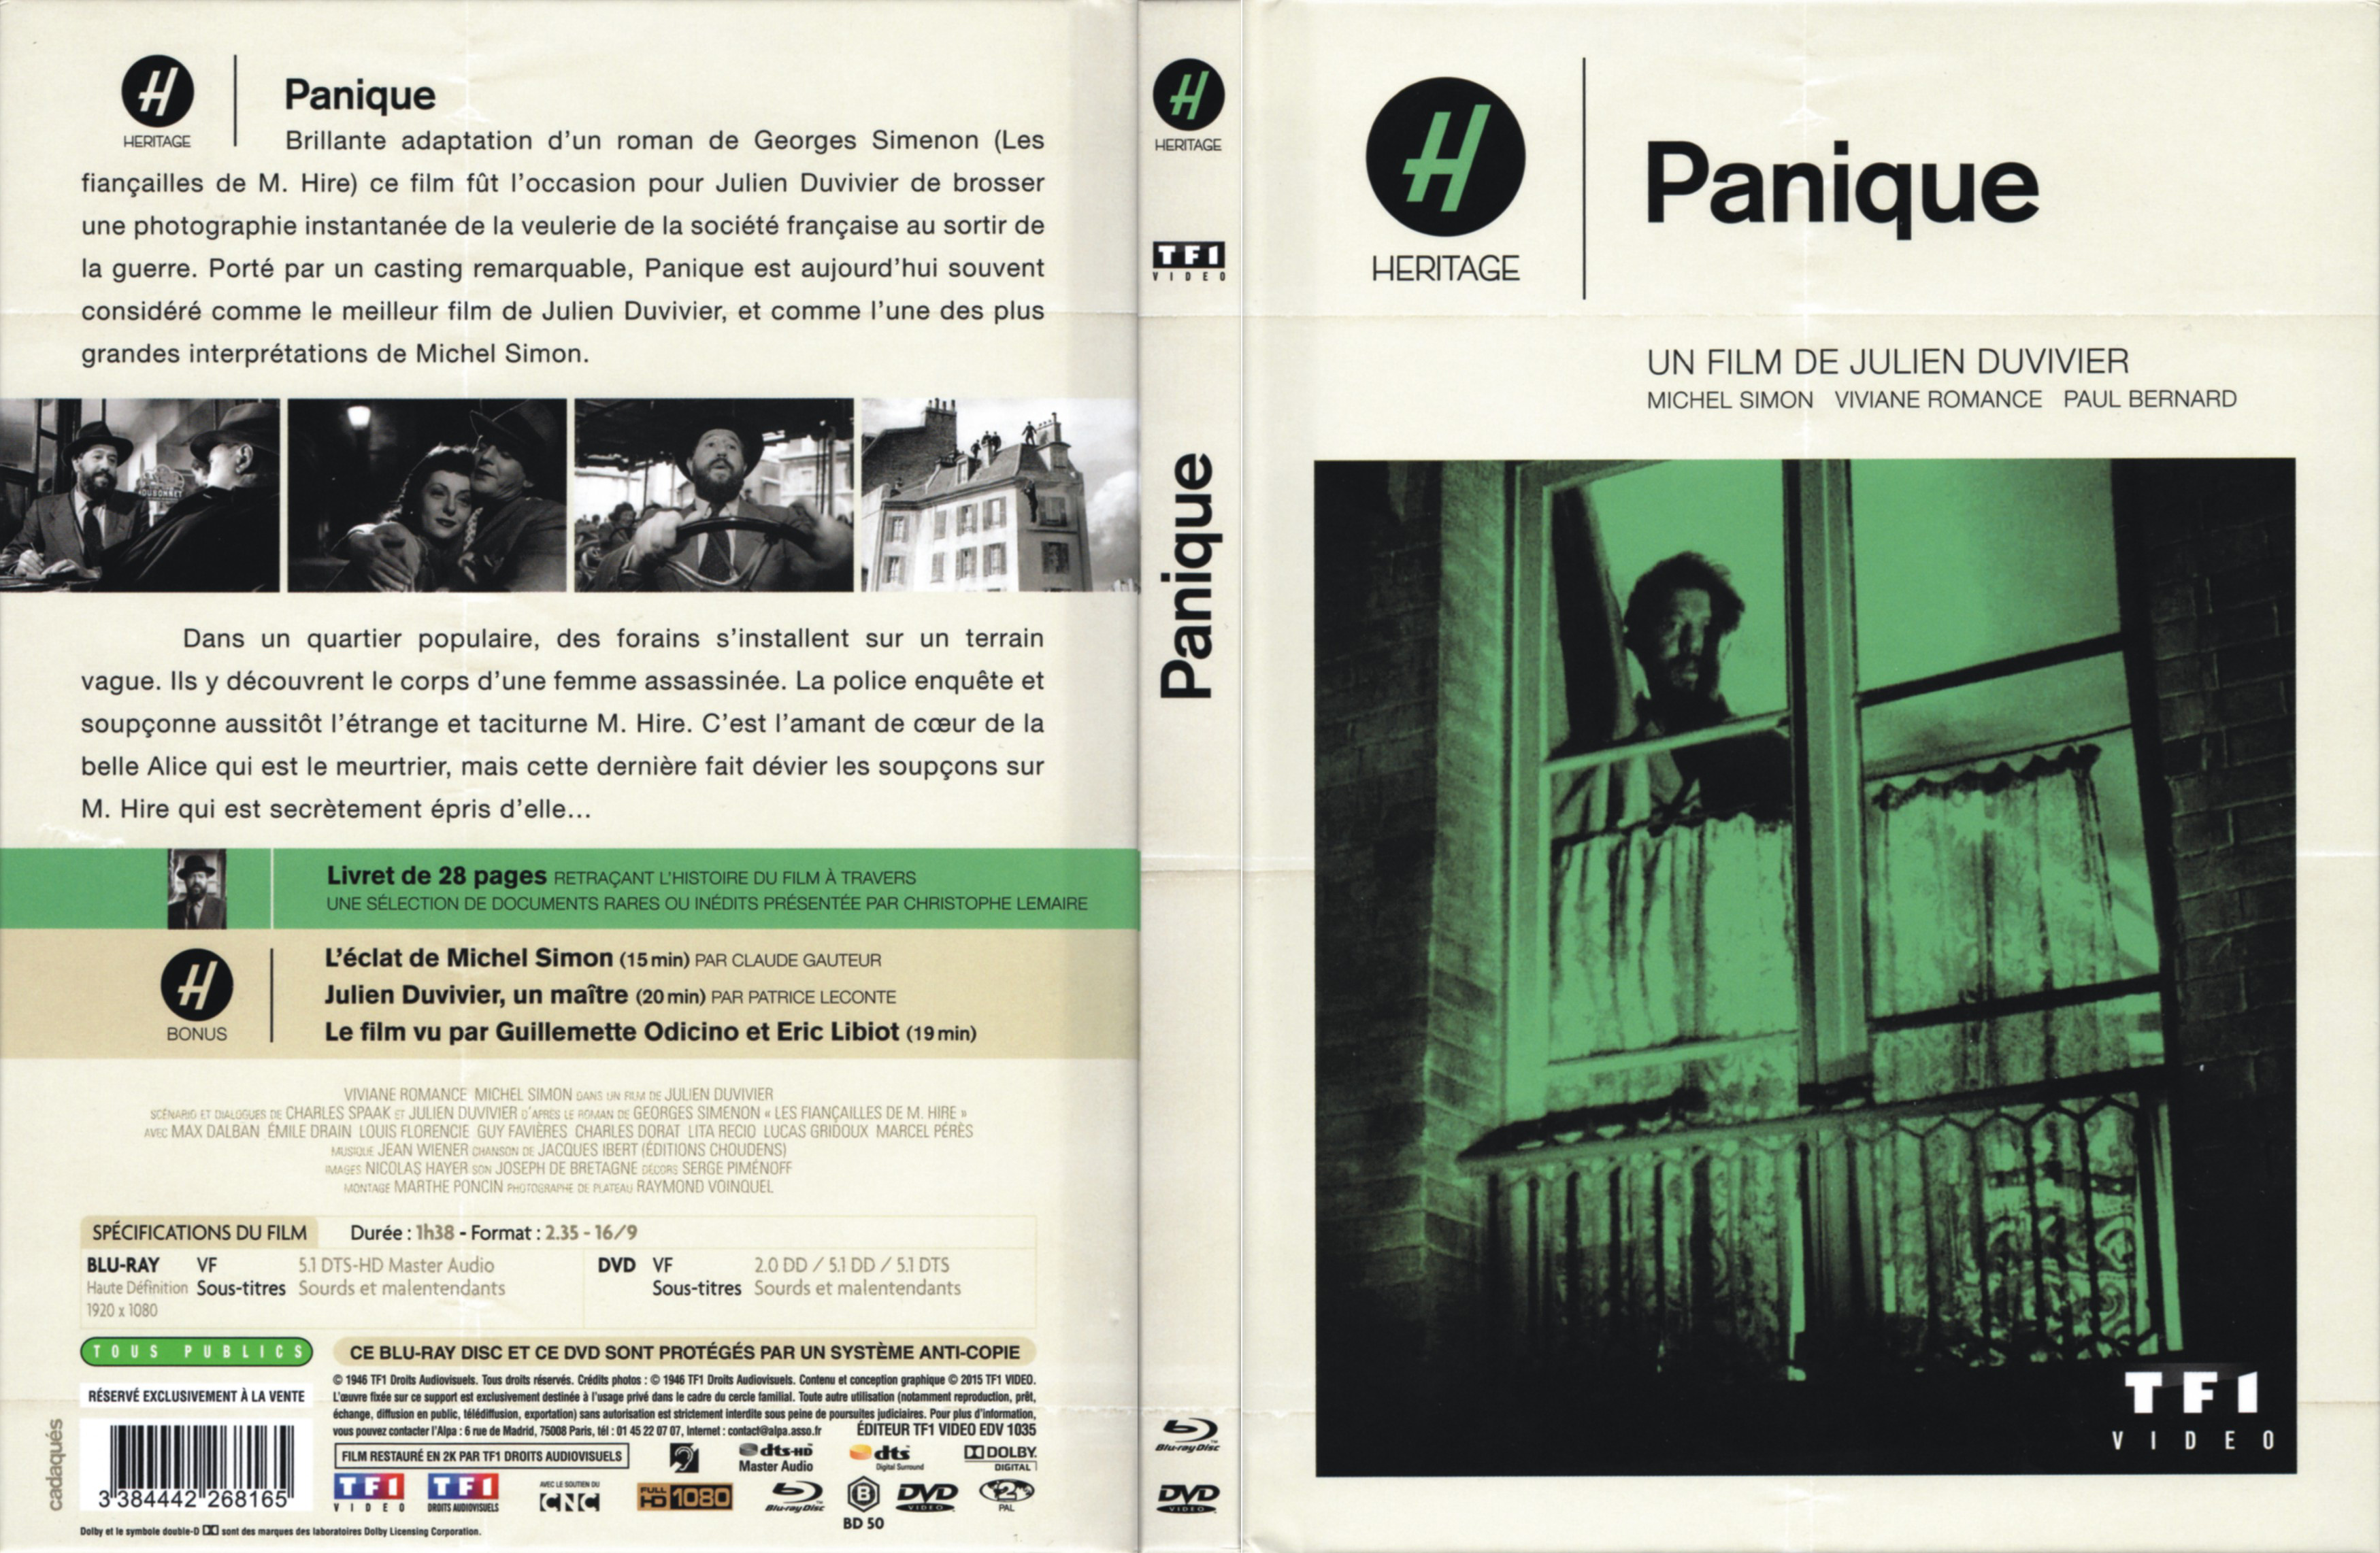 Jaquette DVD Panique (BLU-RAY)